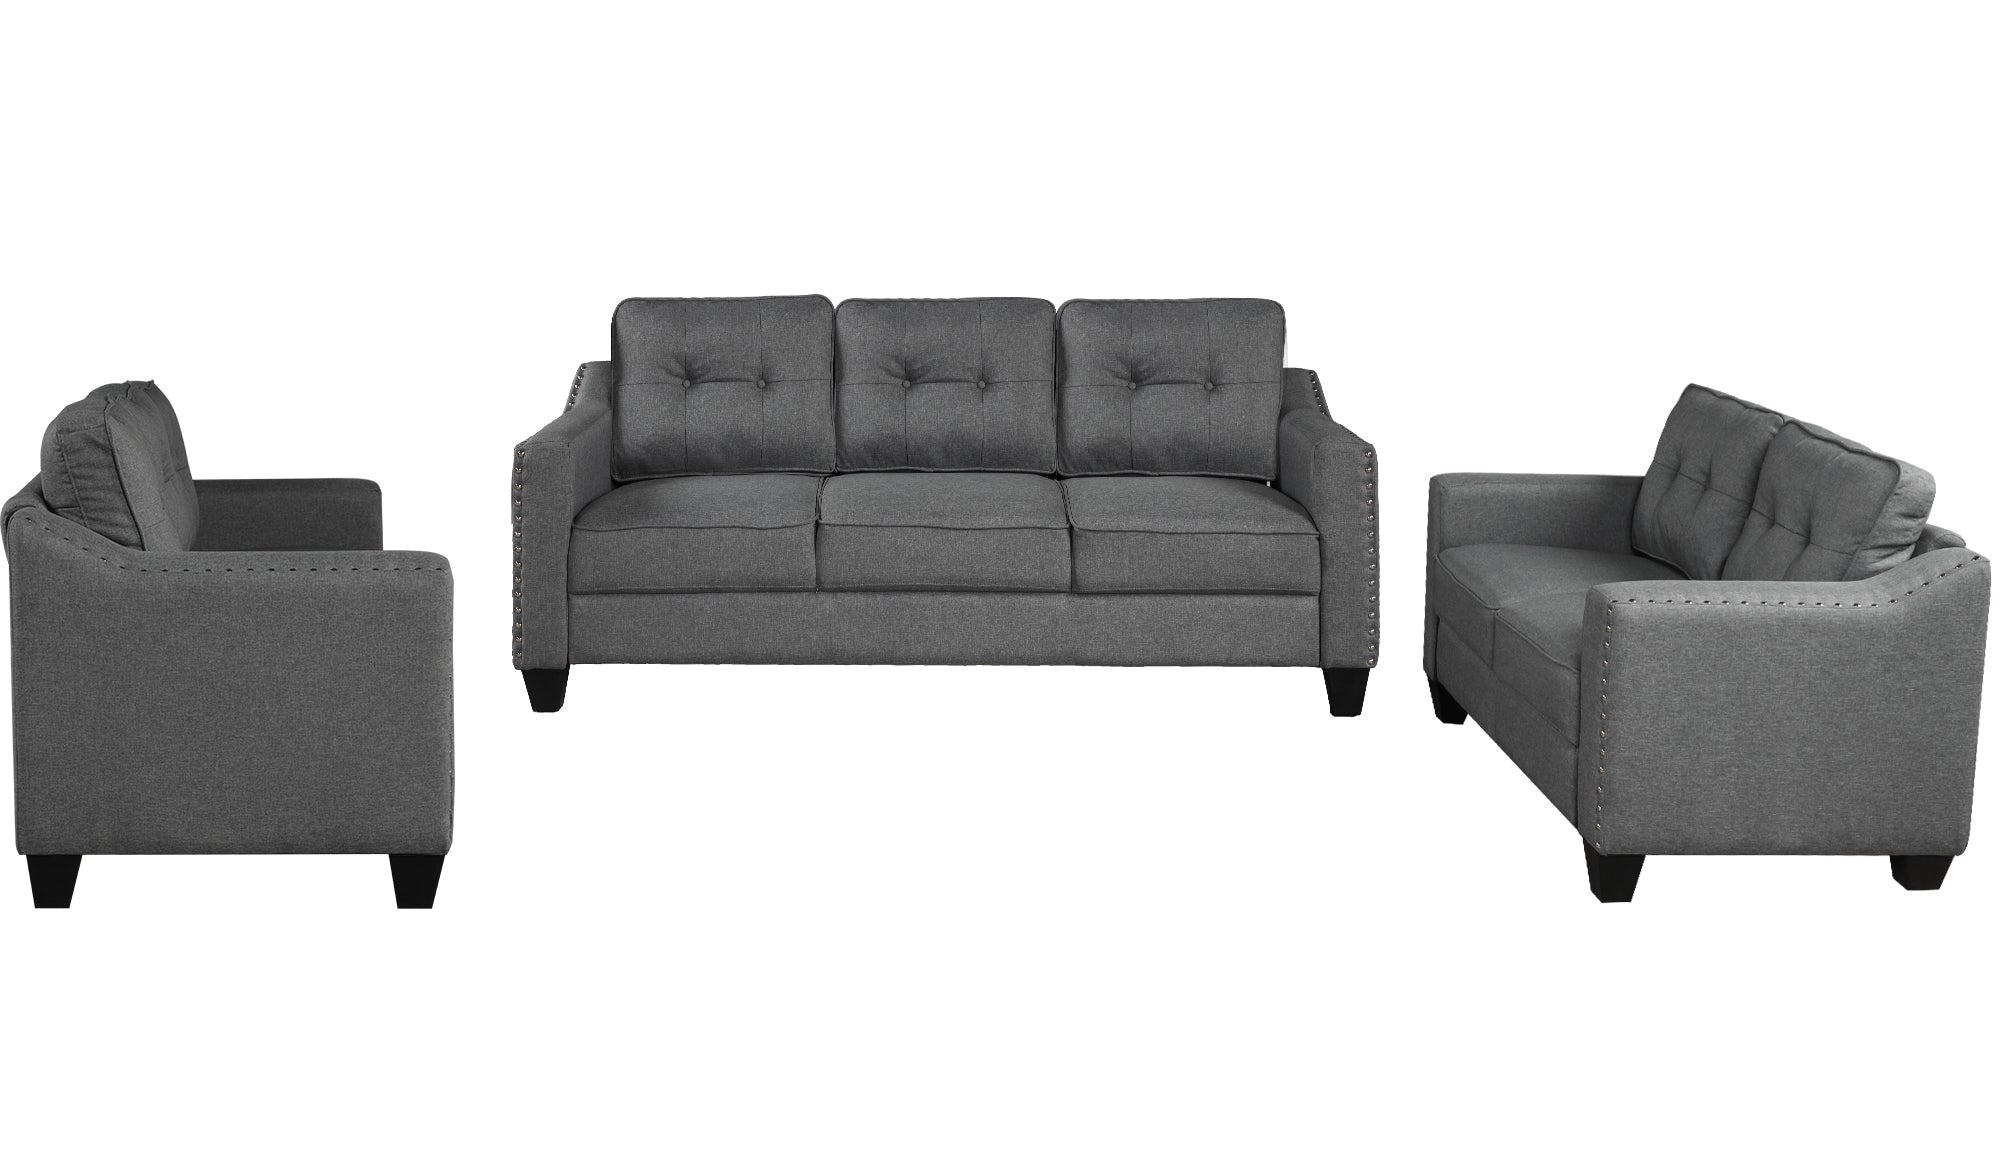 U-Style 3-Piece Living Room Set with Tufted Cushions in Gray: Sofa, Loveseat, Armchair | Stylish and Comfortable Addition to Your Home